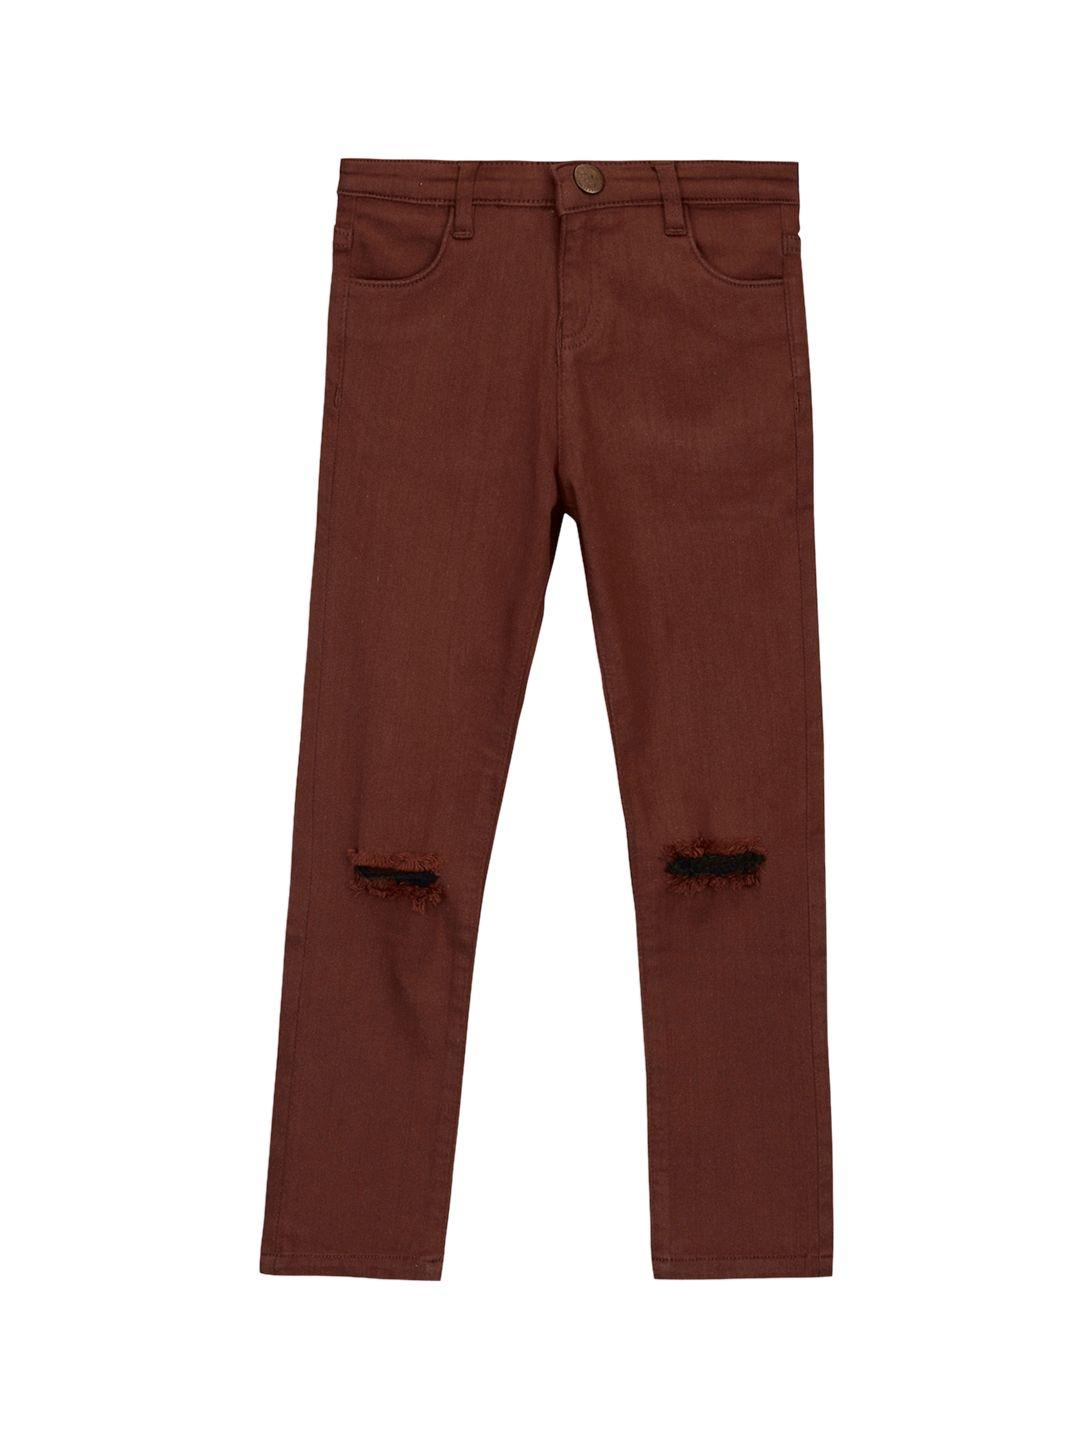 cherry crumble unisex brown solid straight-fit chino pants